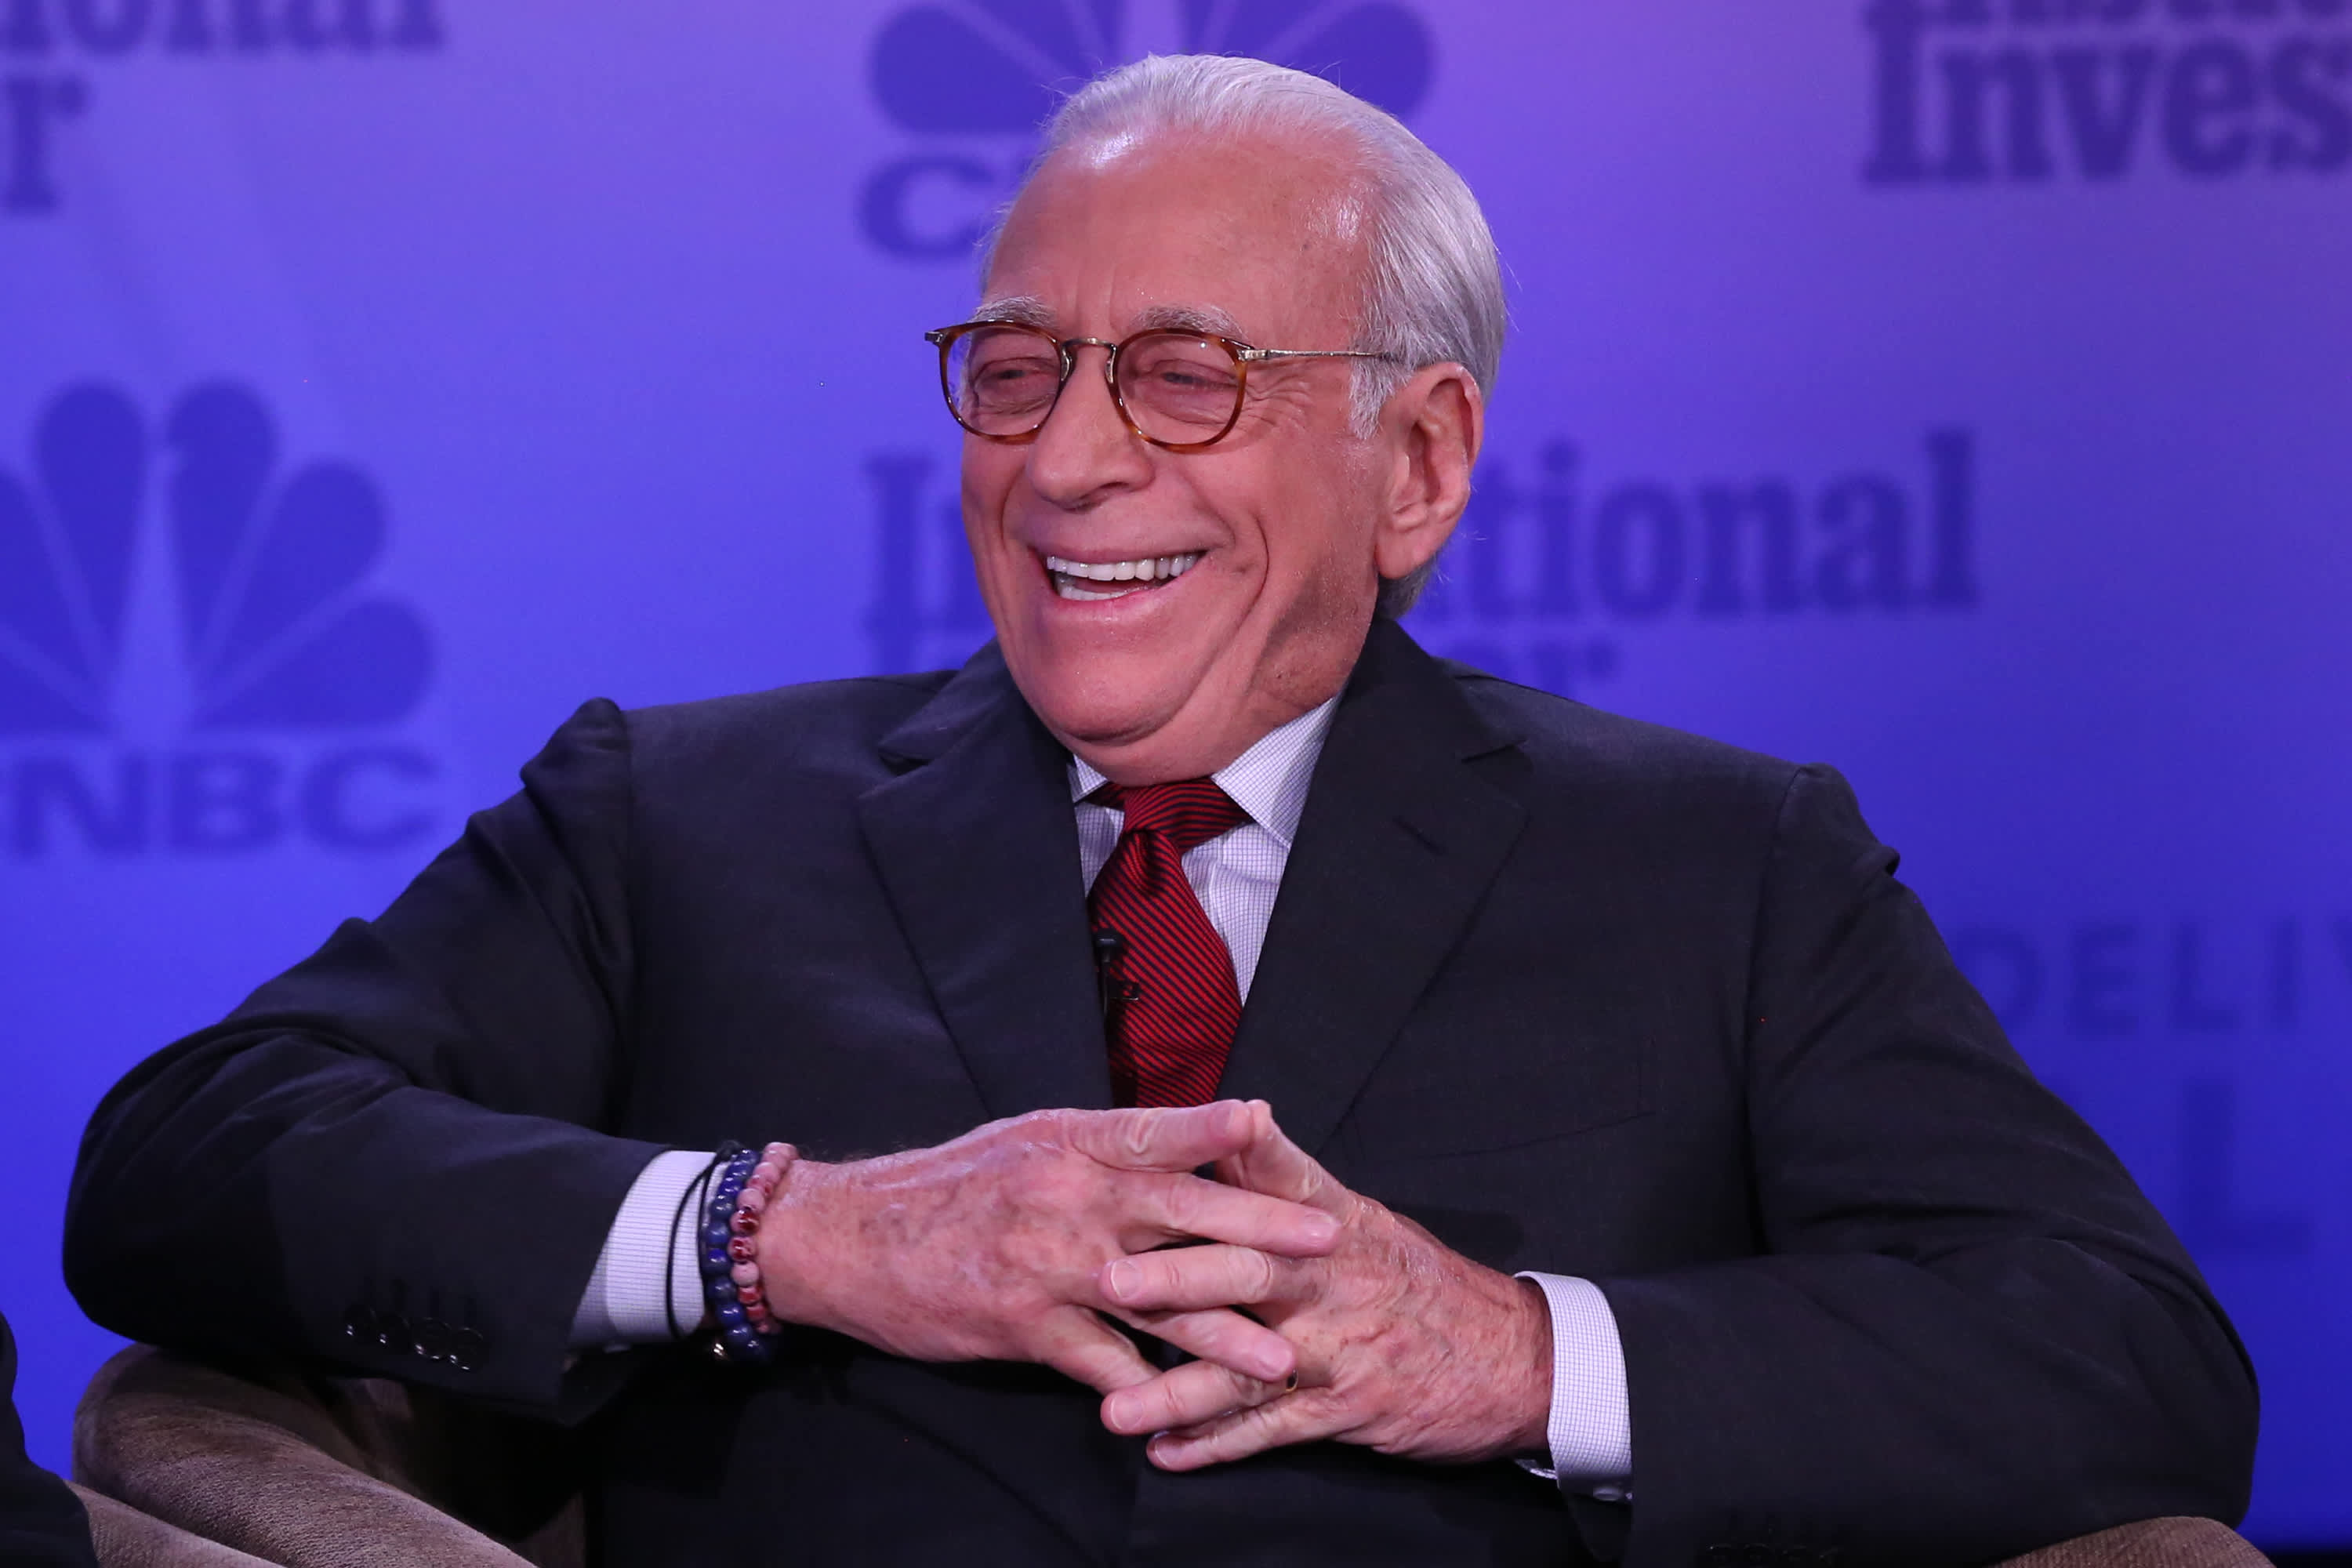 Nelson Peltz's attempt to join Disney's board could force much-needed accountability